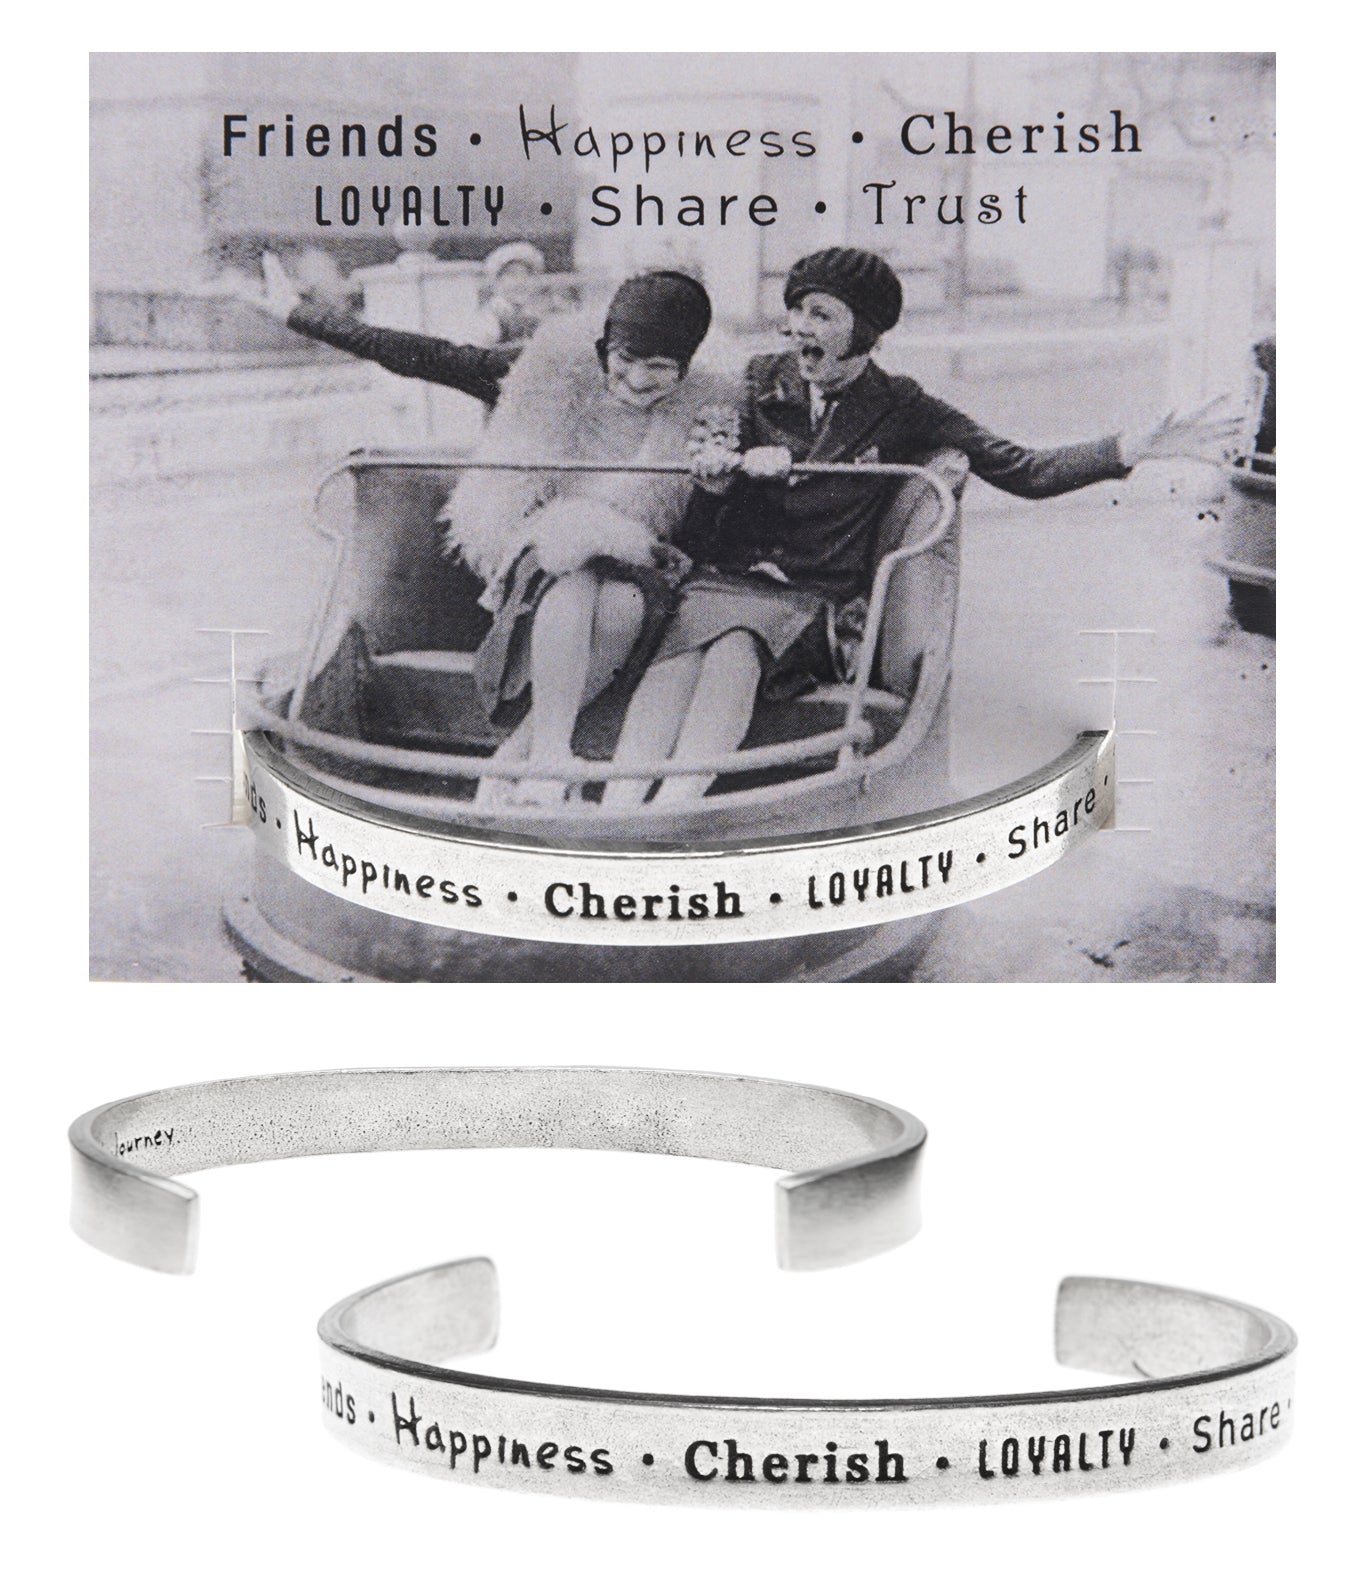 Friends-Happiness-Cherish Loyalty Share Trust Quotable Cuff Bracelet with backer card